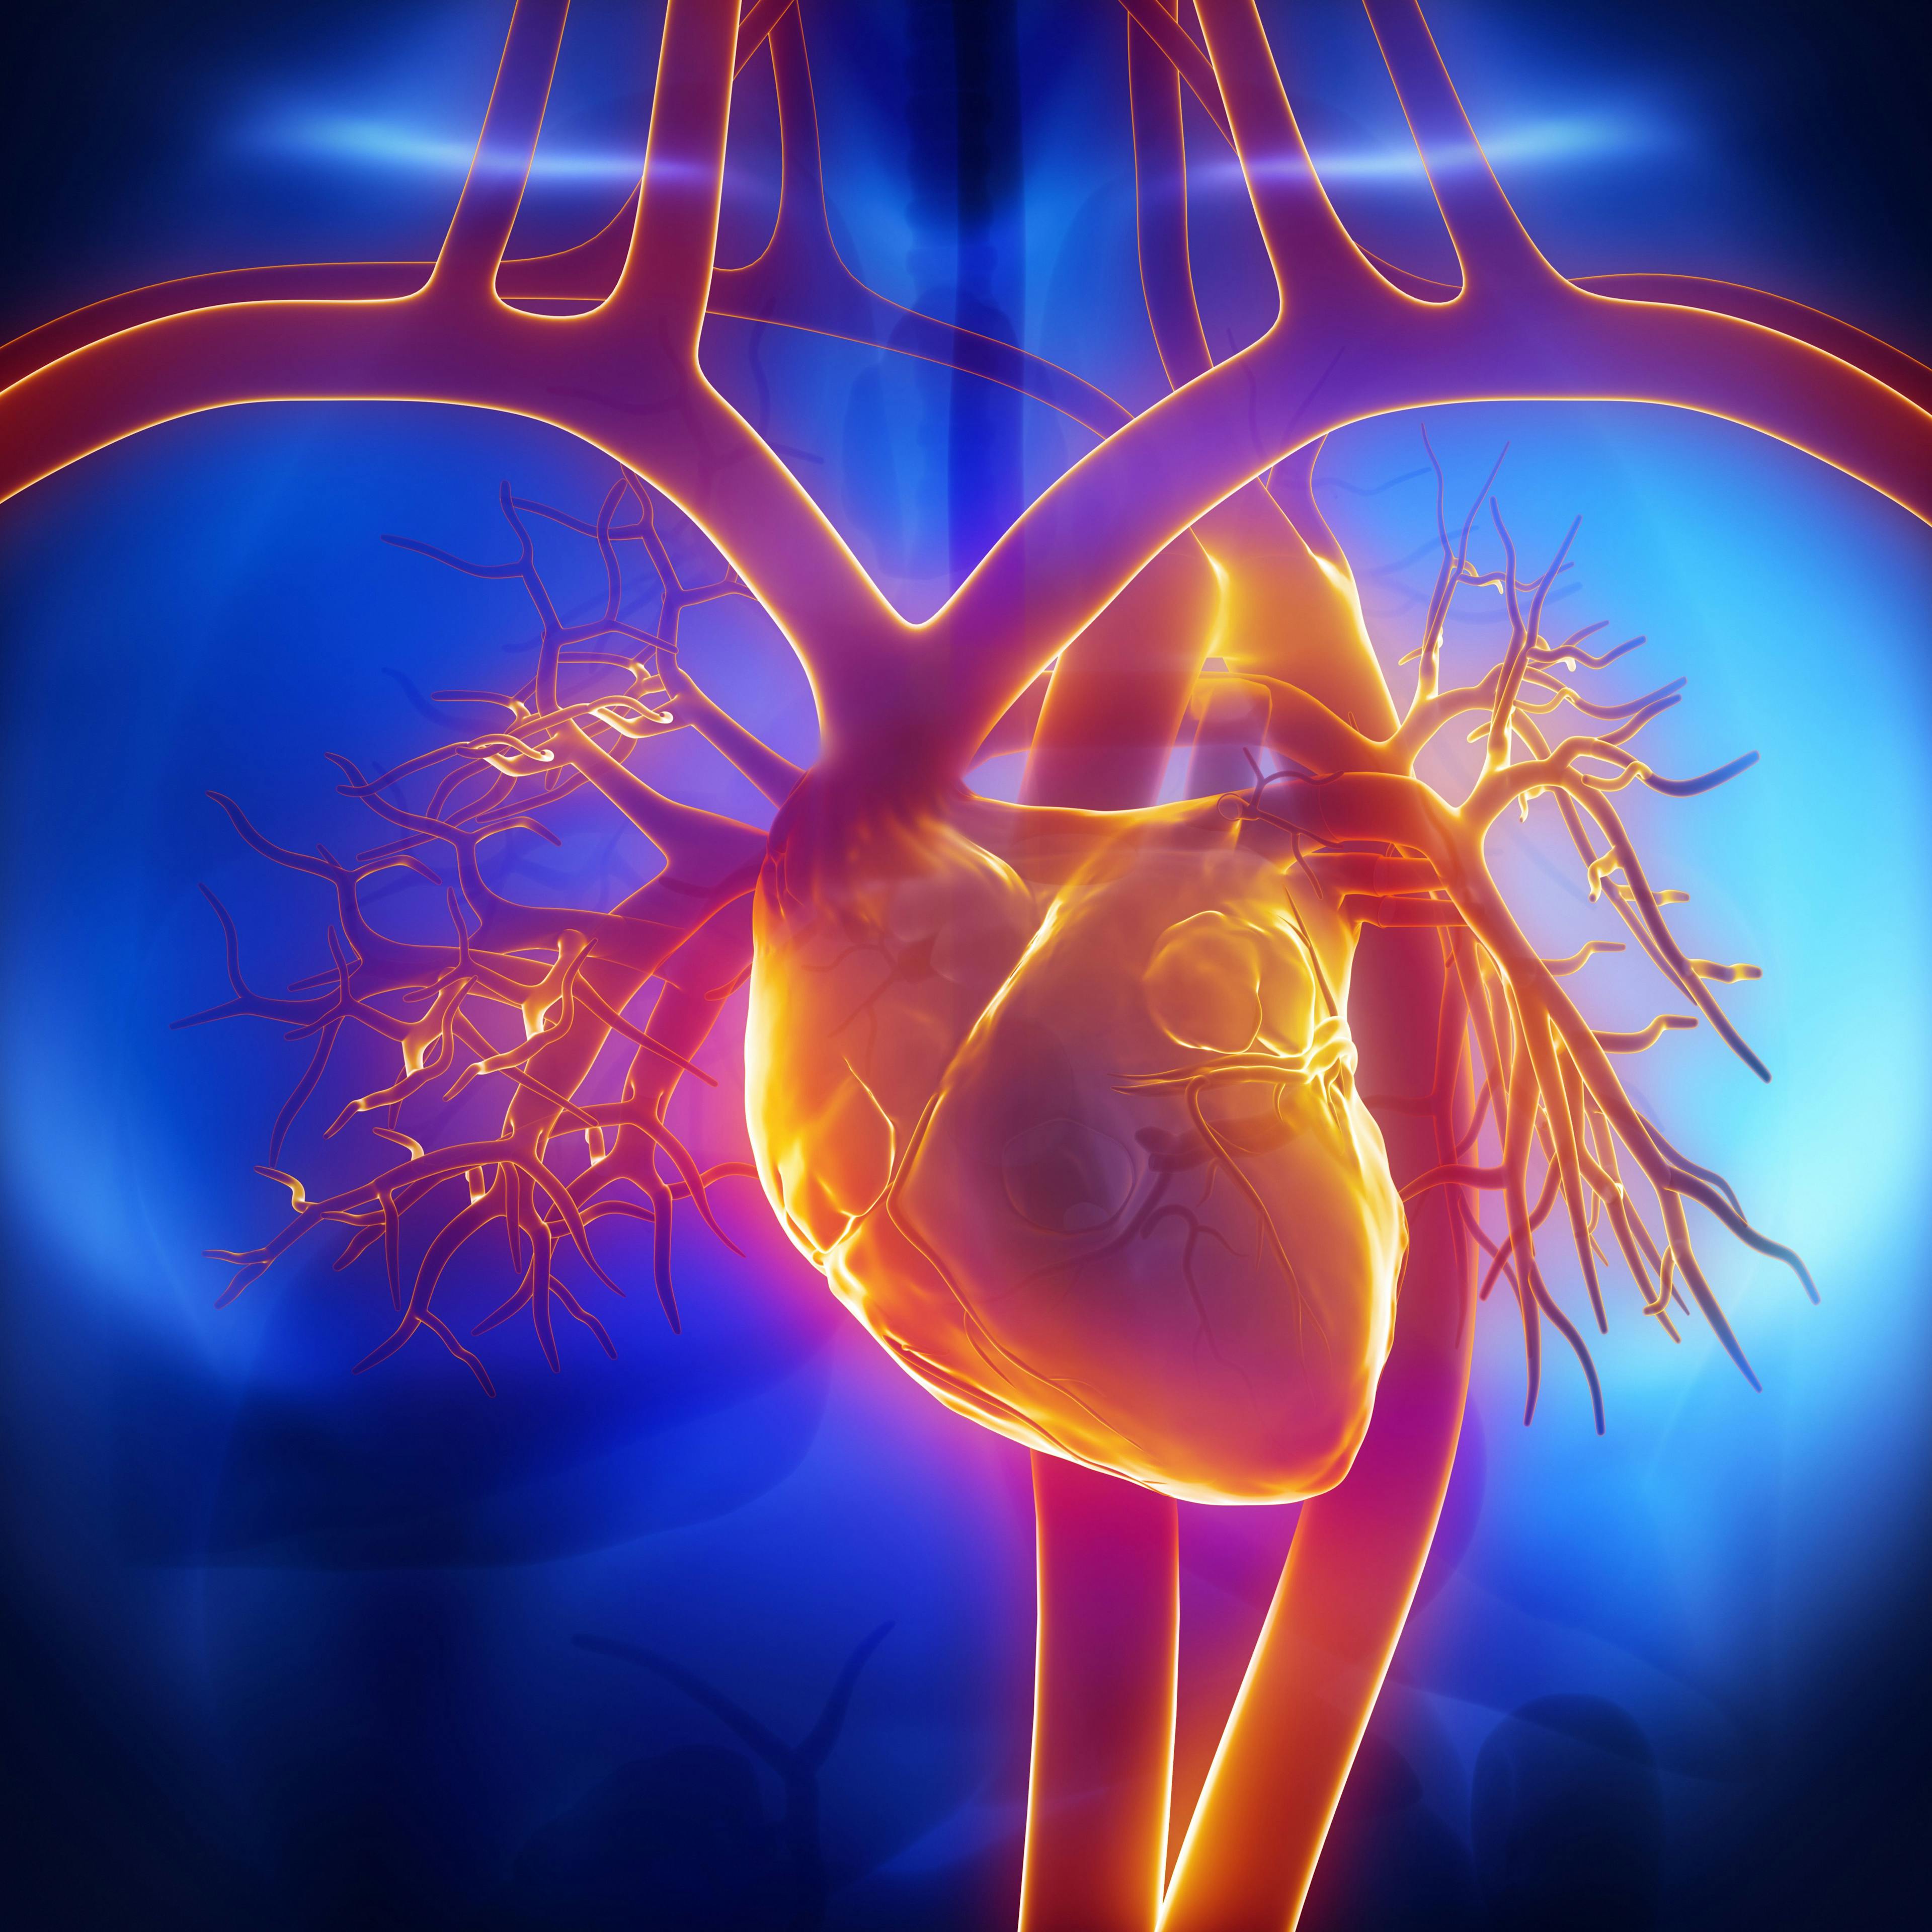 Study: Vascepa Cuts Risk of Major Cardiovascular Events in Those With Prior Heart Attacks